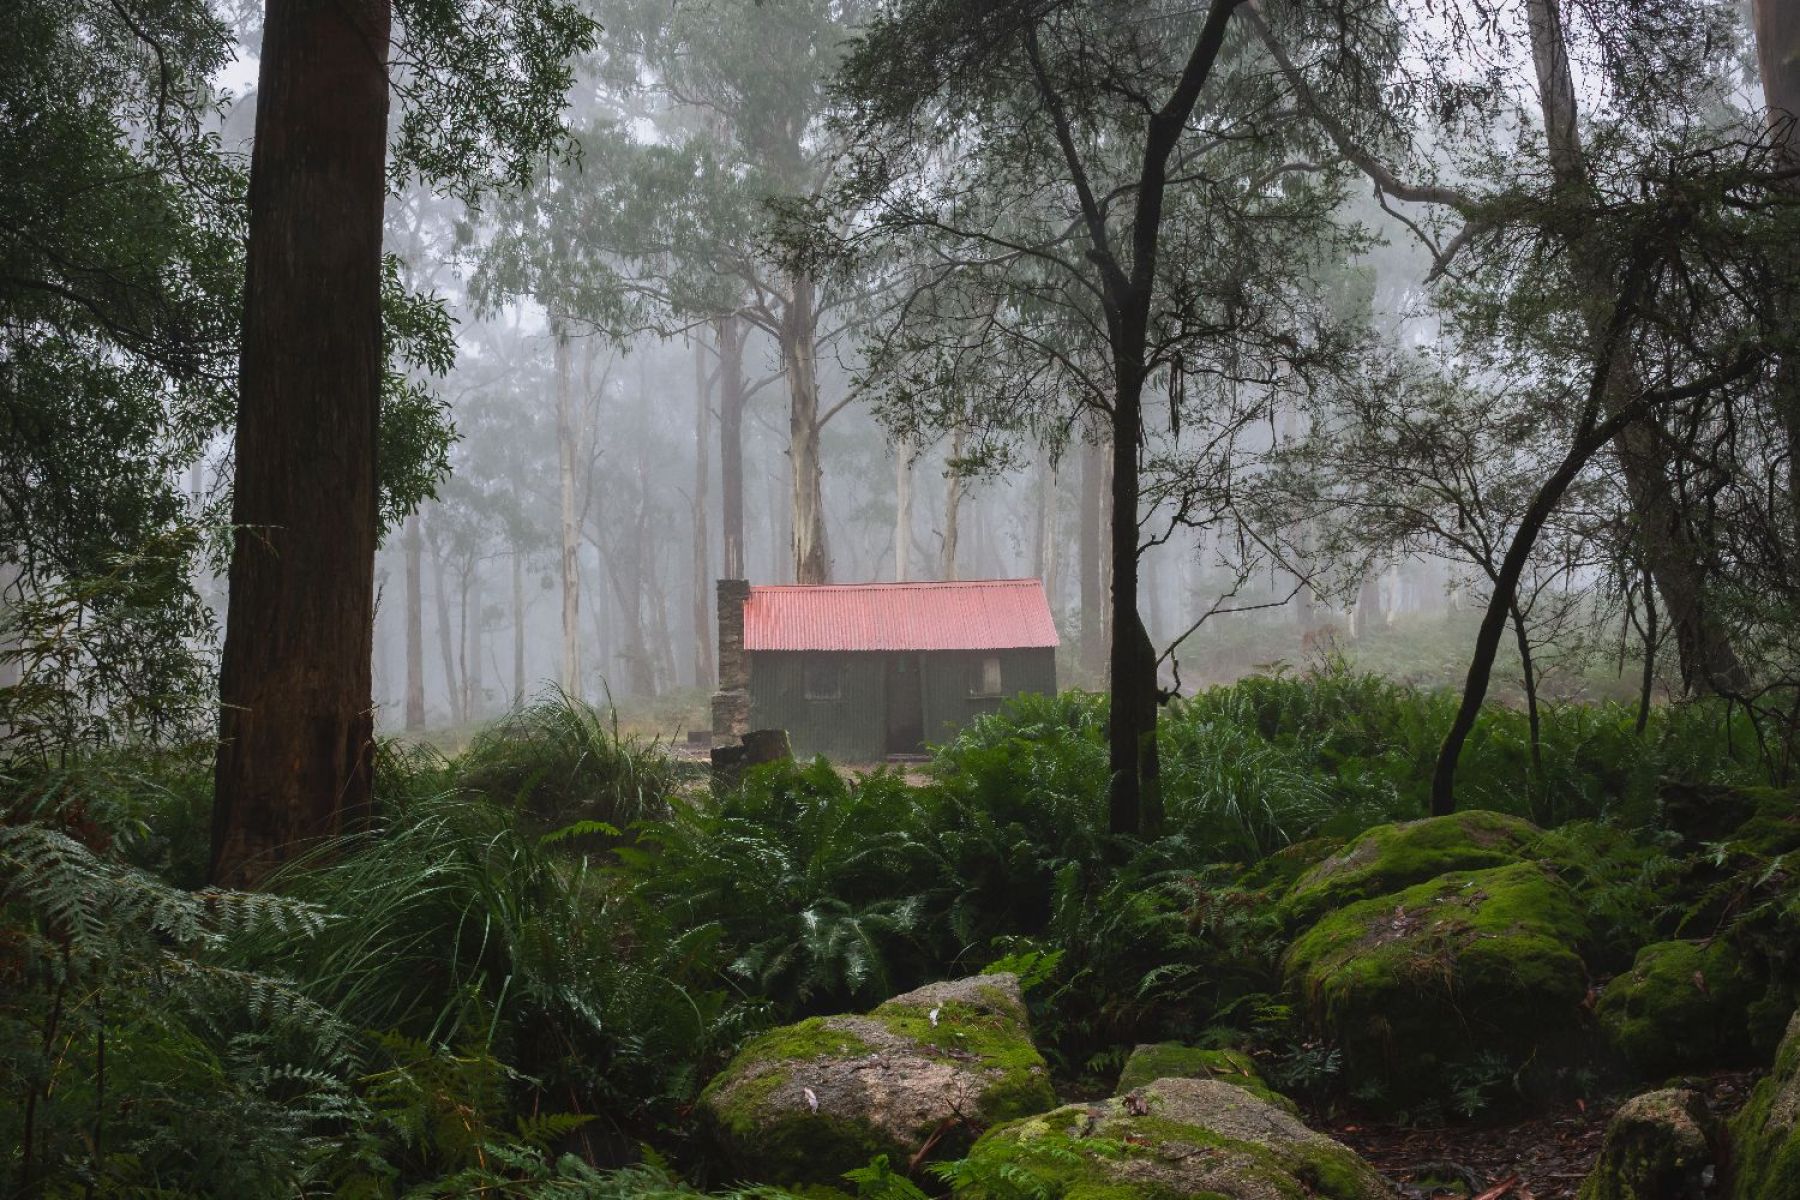 The mugwamp hut in the clearing, surrounded by dense fog